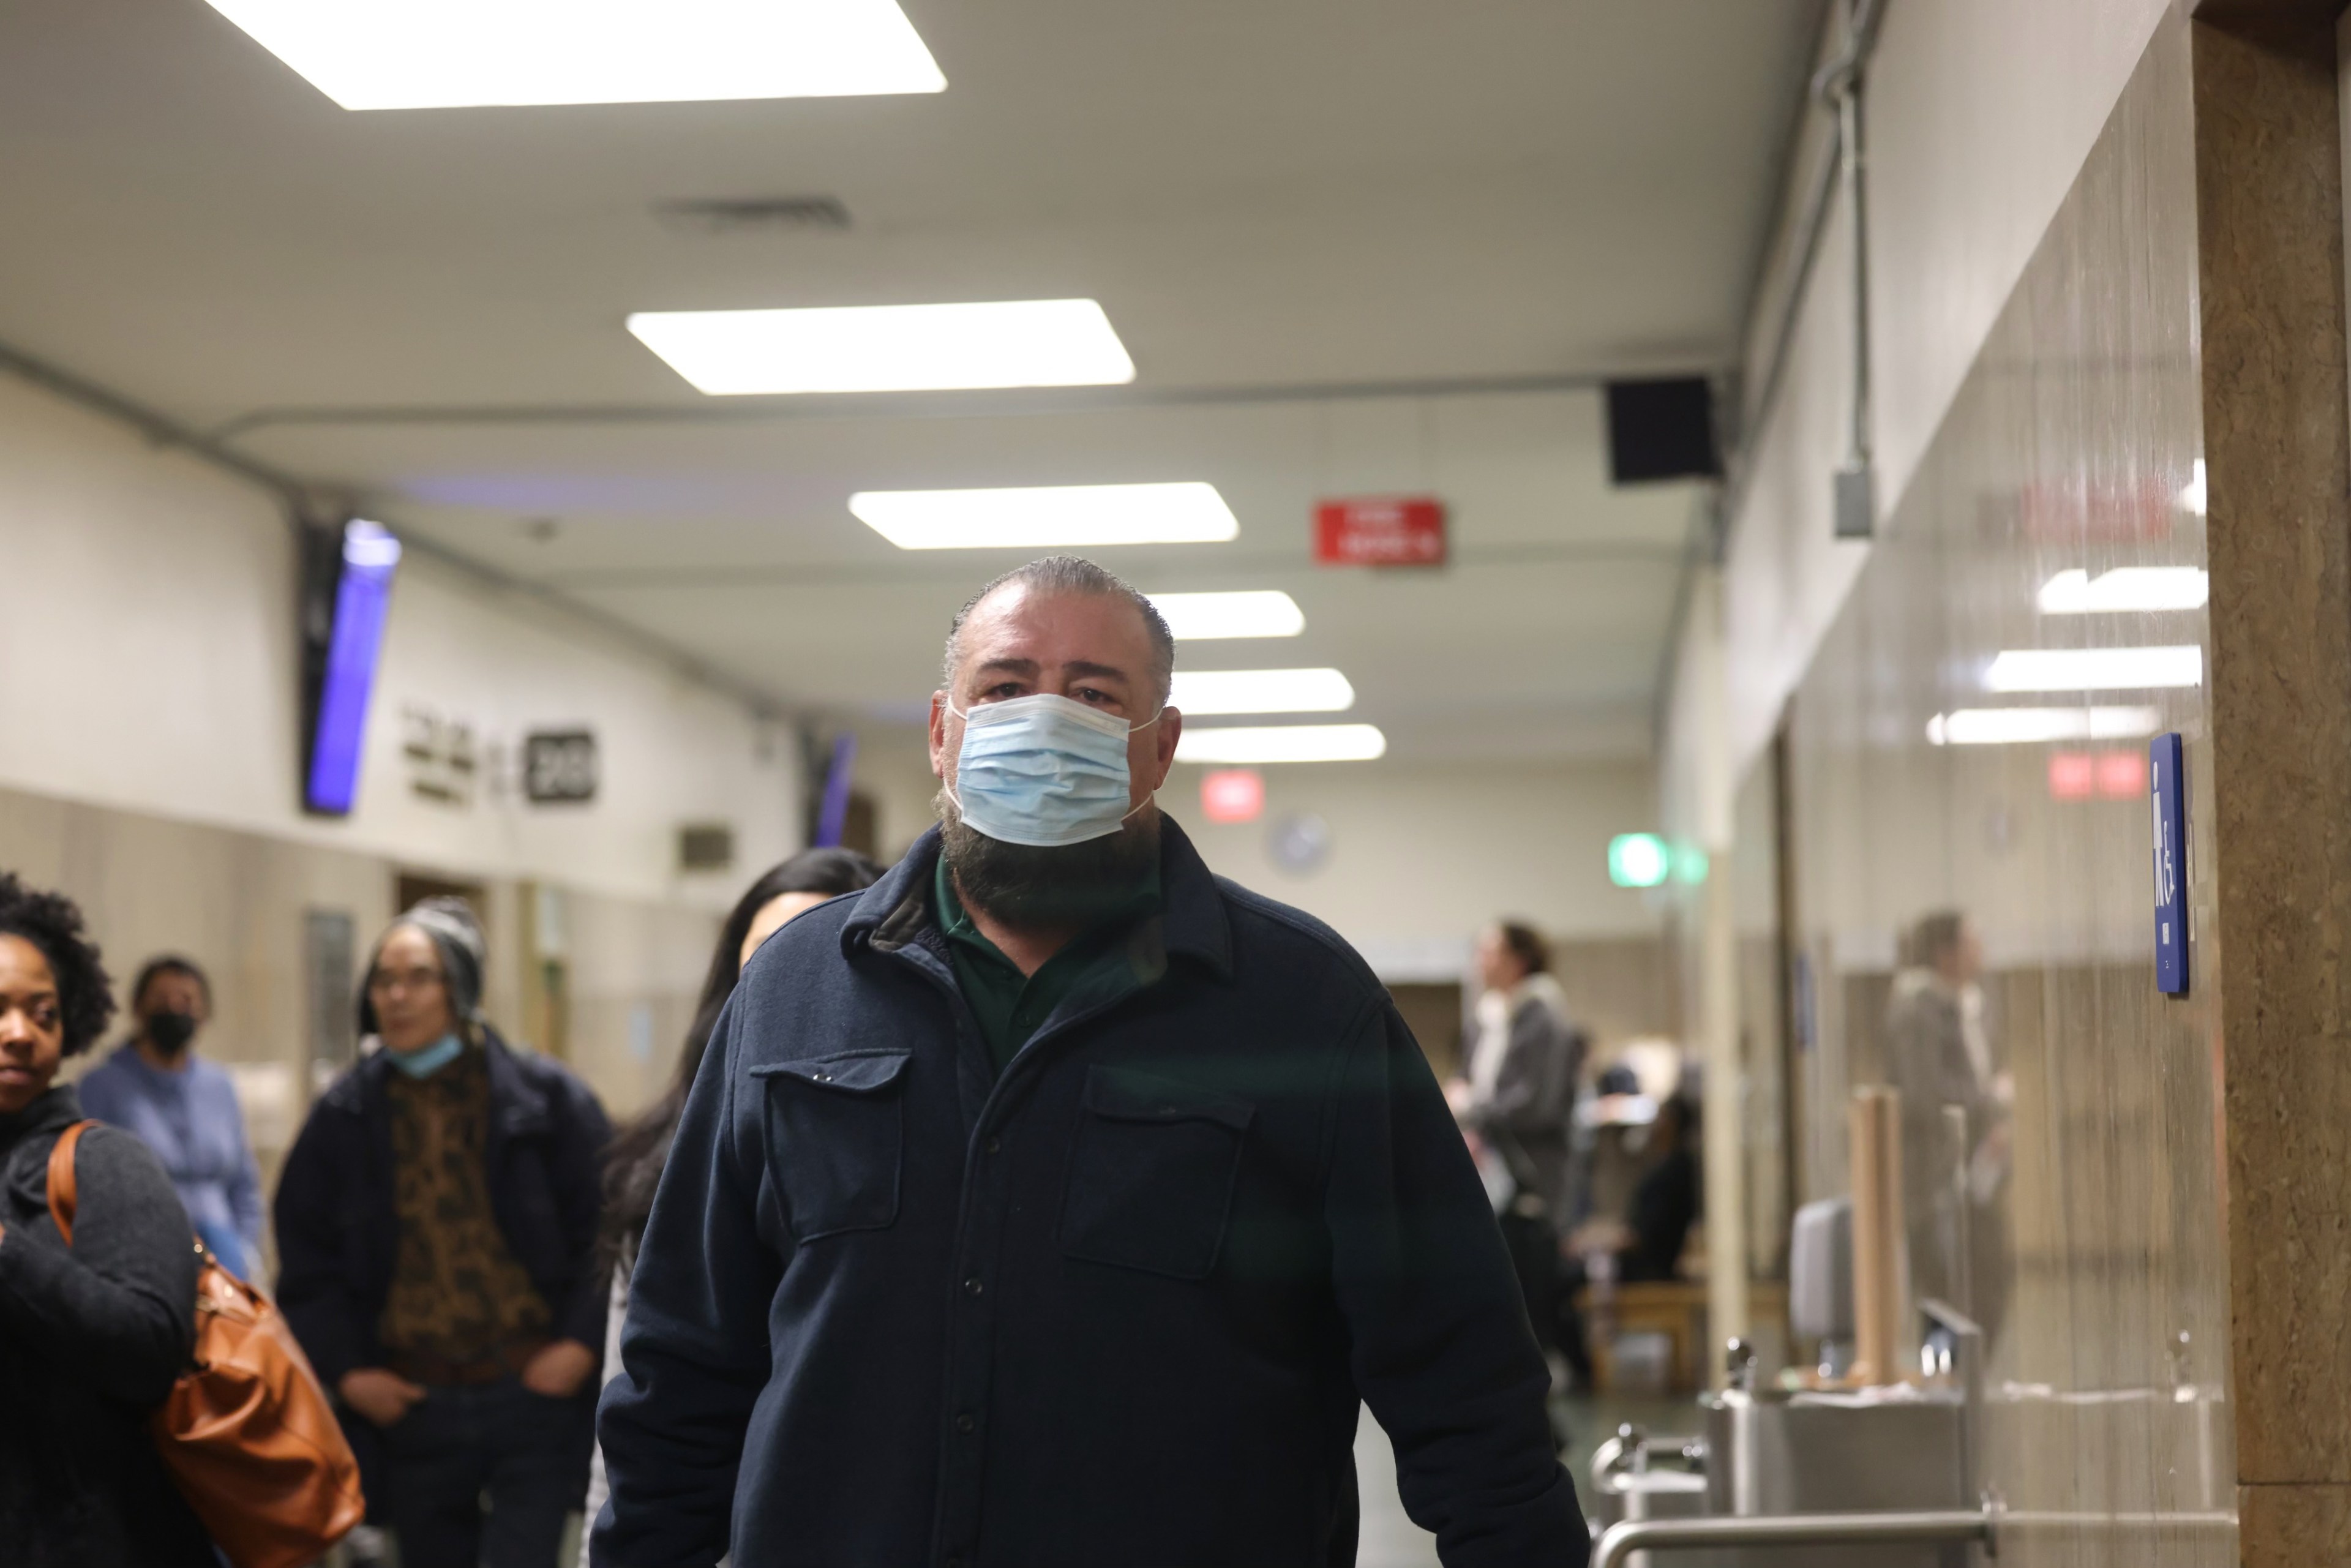 Fomer SFFD Commissioner Don Carmignani, wearing a face mask, walks through the hallways of the Hall of Justice in San Francisco.